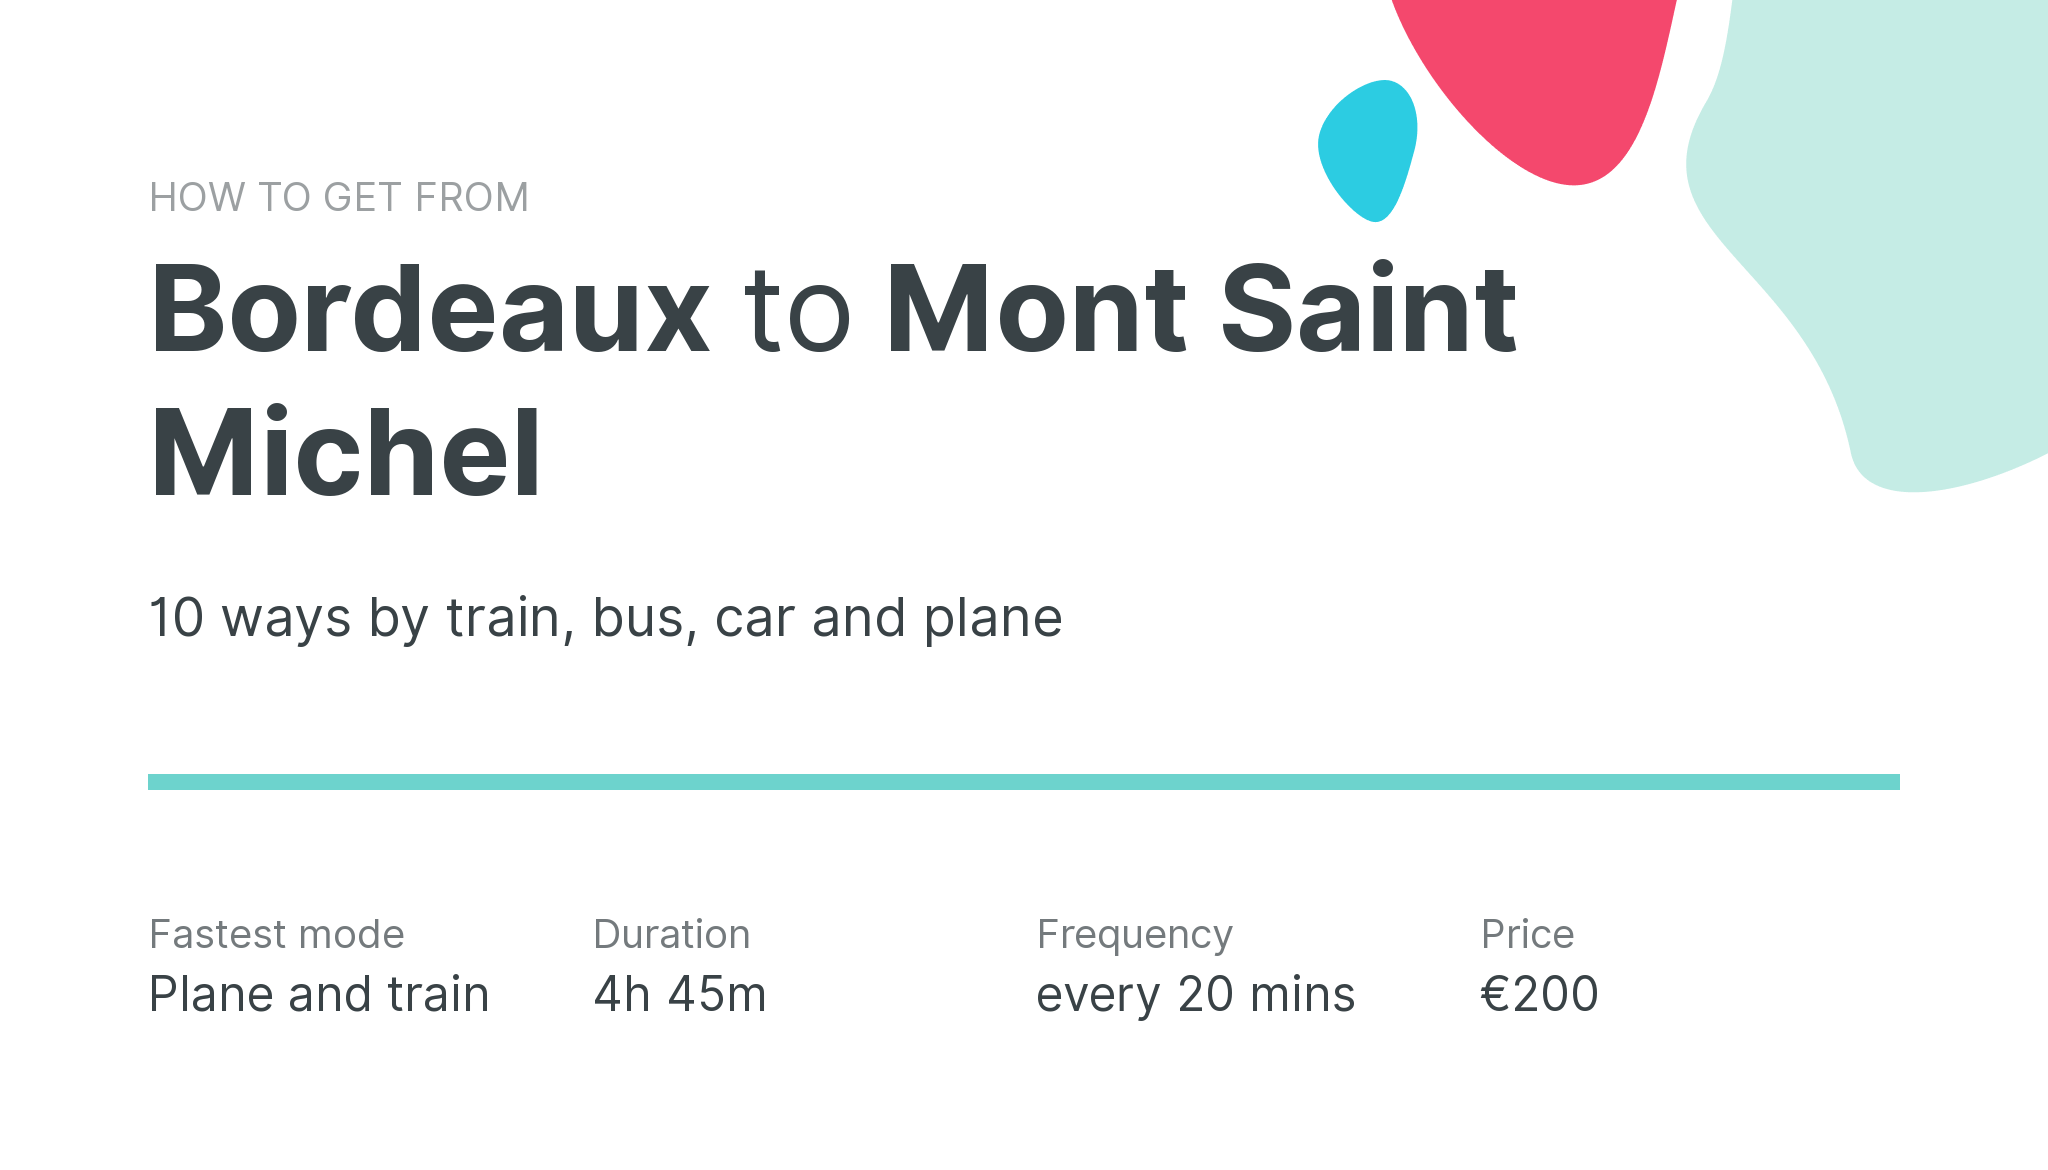 How do I get from Bordeaux to Mont Saint Michel